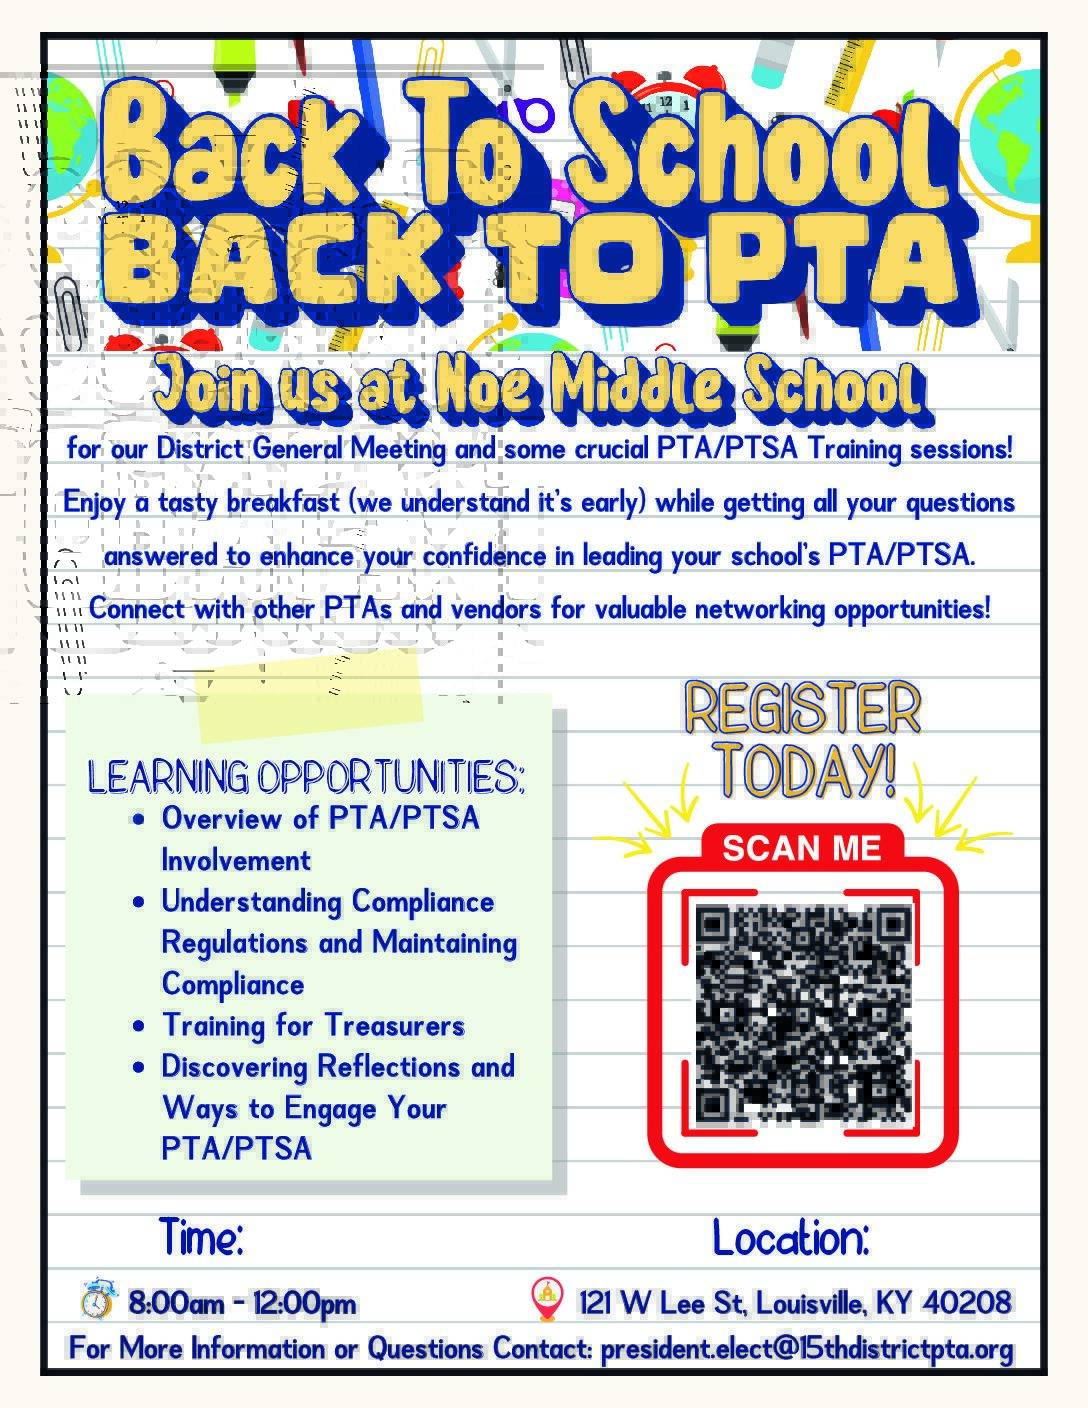 Back to School / Back to PTA Training Aug 17